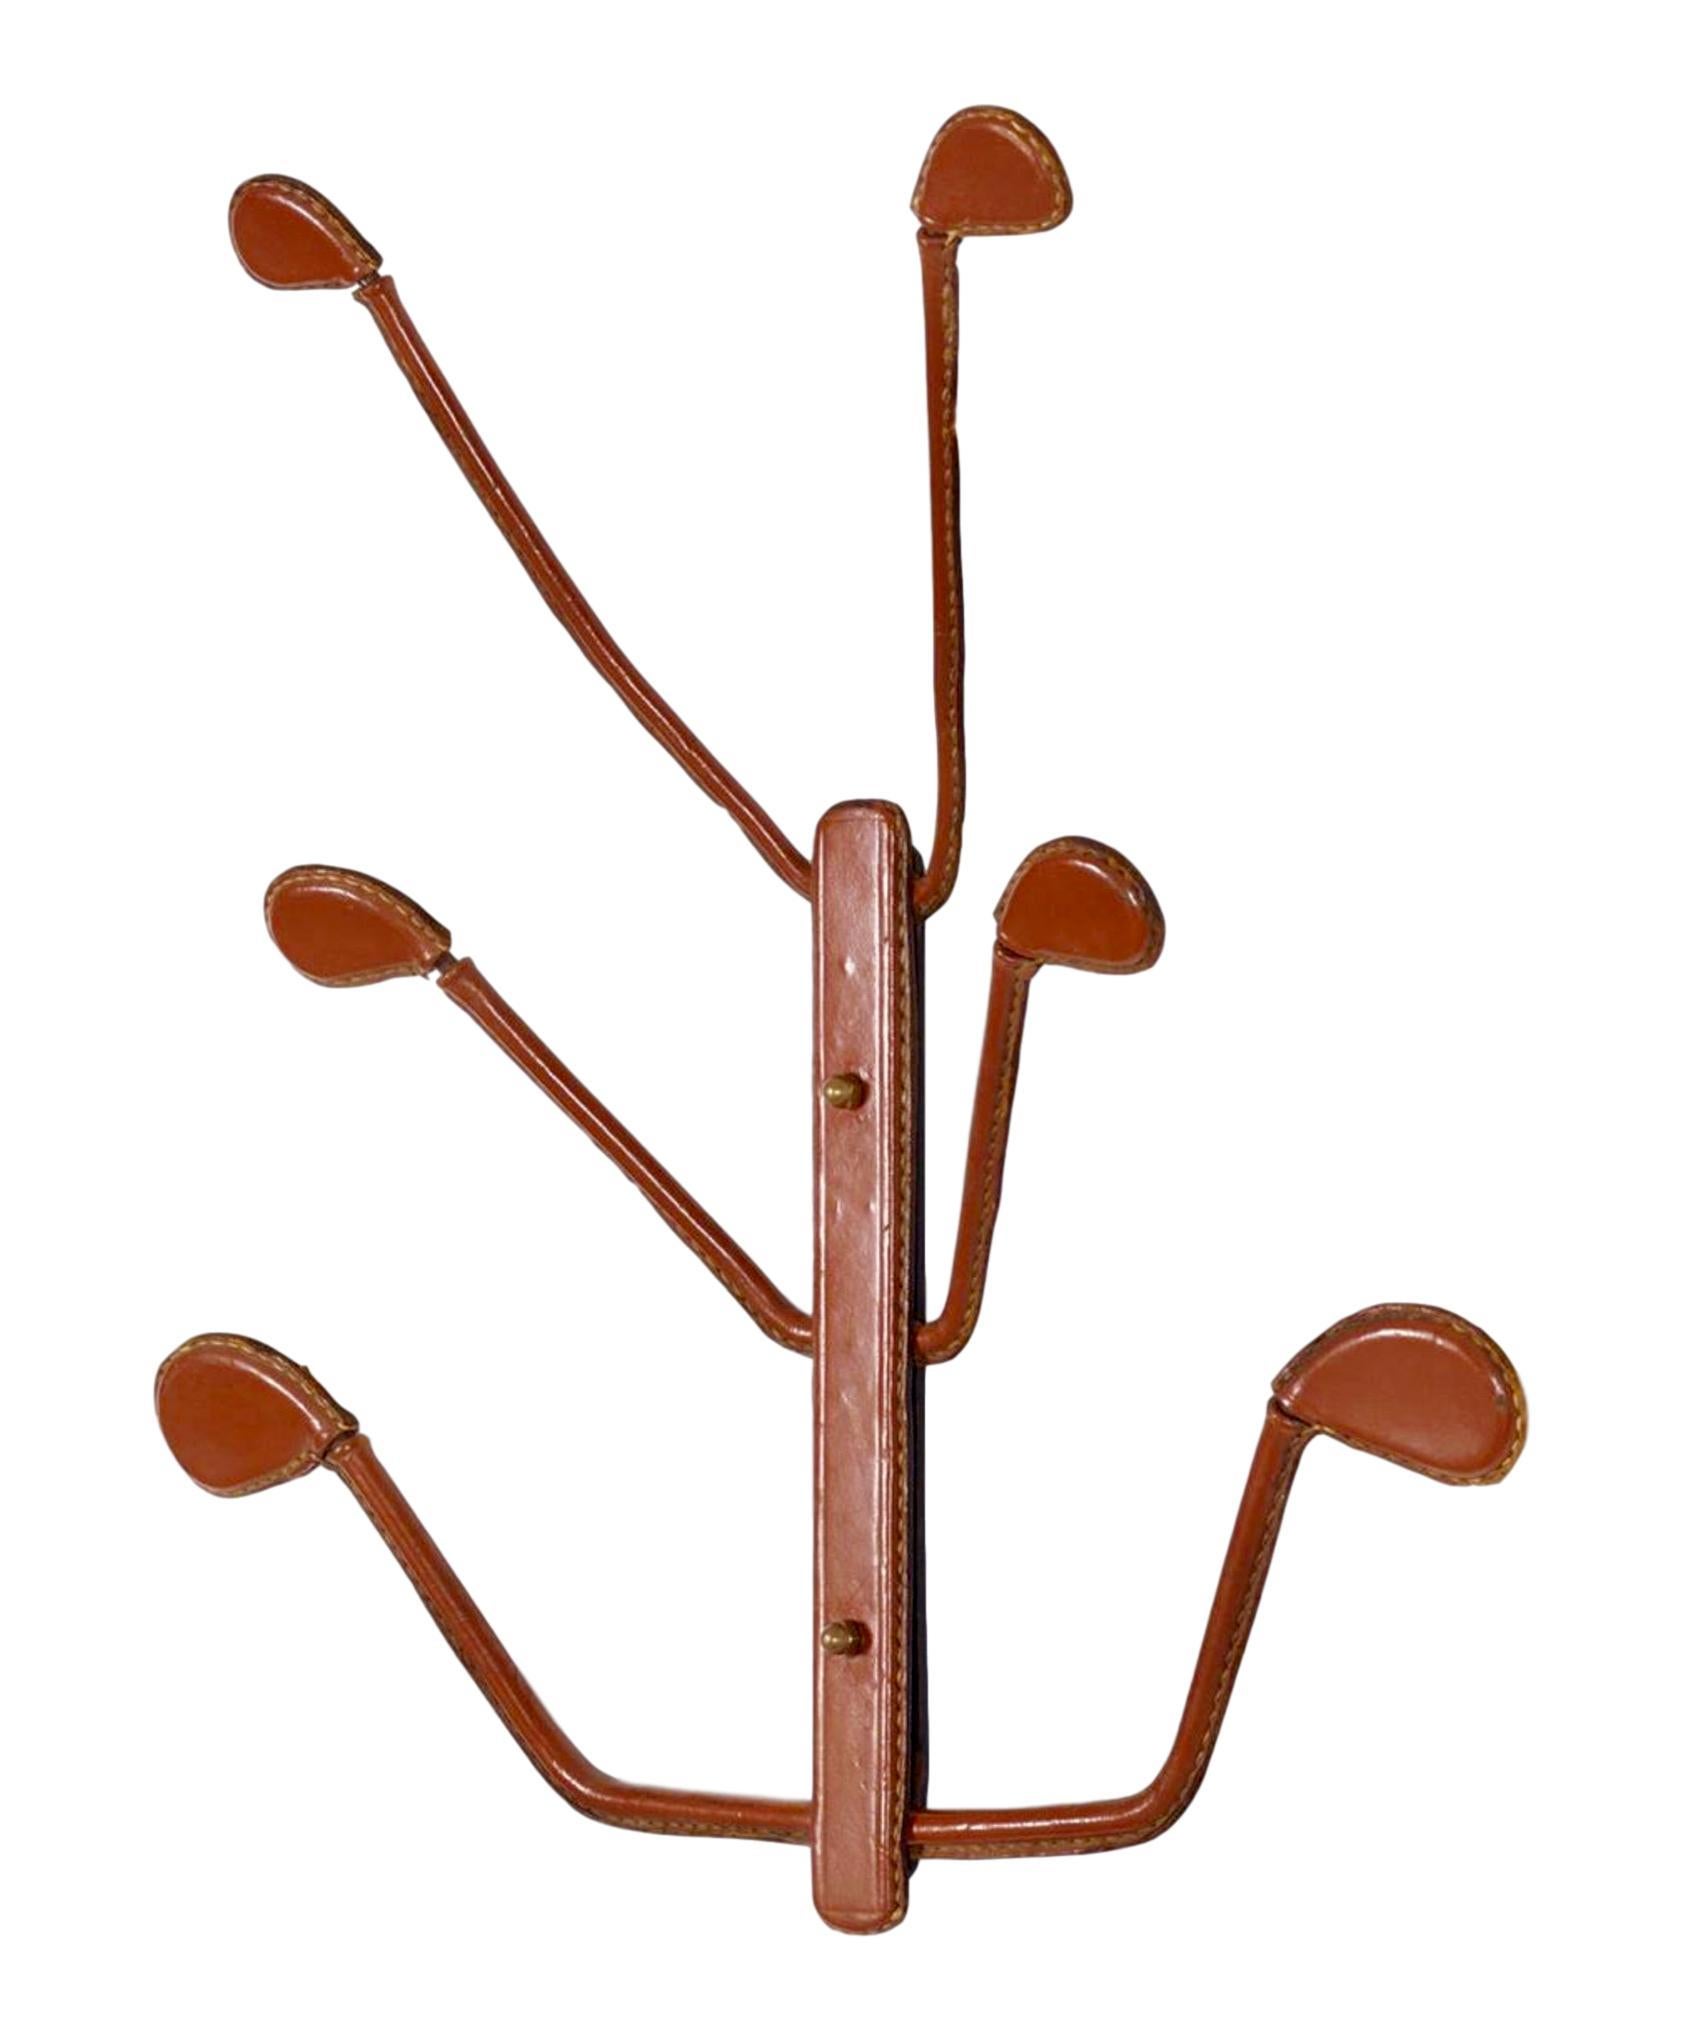 Classic coat rack by French designer Jacques Adnet. 6 leather arms extend from center bracket. Large presence, just under 2 feet wide and tall. Entire piece is wrapped in leather with signature Adnet contrast stitching. Great vintage